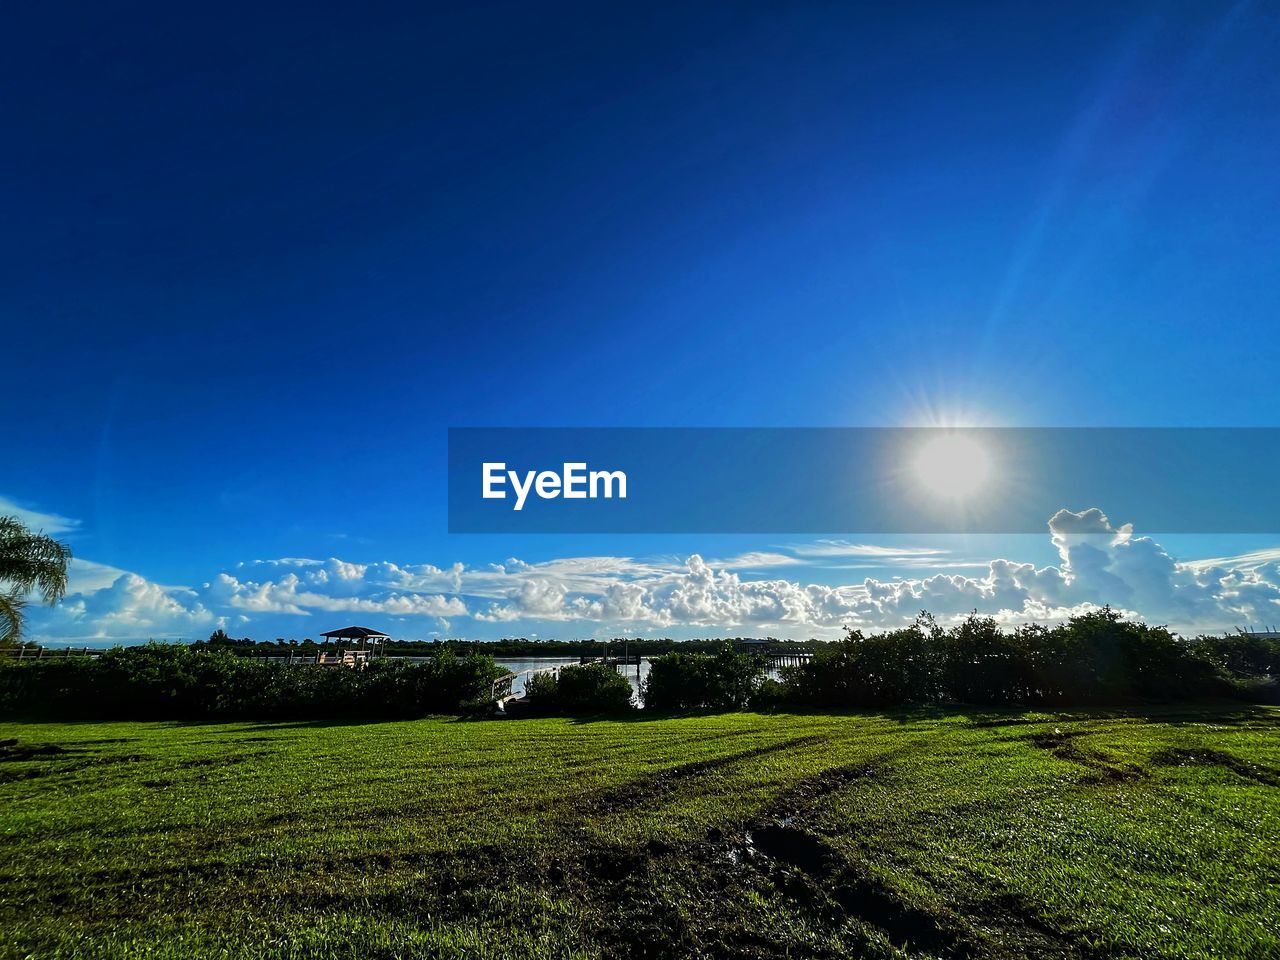 sky, horizon, sunlight, landscape, environment, plant, scenics - nature, nature, beauty in nature, land, field, blue, grass, cloud, tranquility, green, tranquil scene, no people, mountain, rural scene, morning, agriculture, sunbeam, outdoors, tree, lens flare, growth, clear sky, sun, meadow, light, farm, idyllic, day, dusk, plain, sunny, reflection, grassland